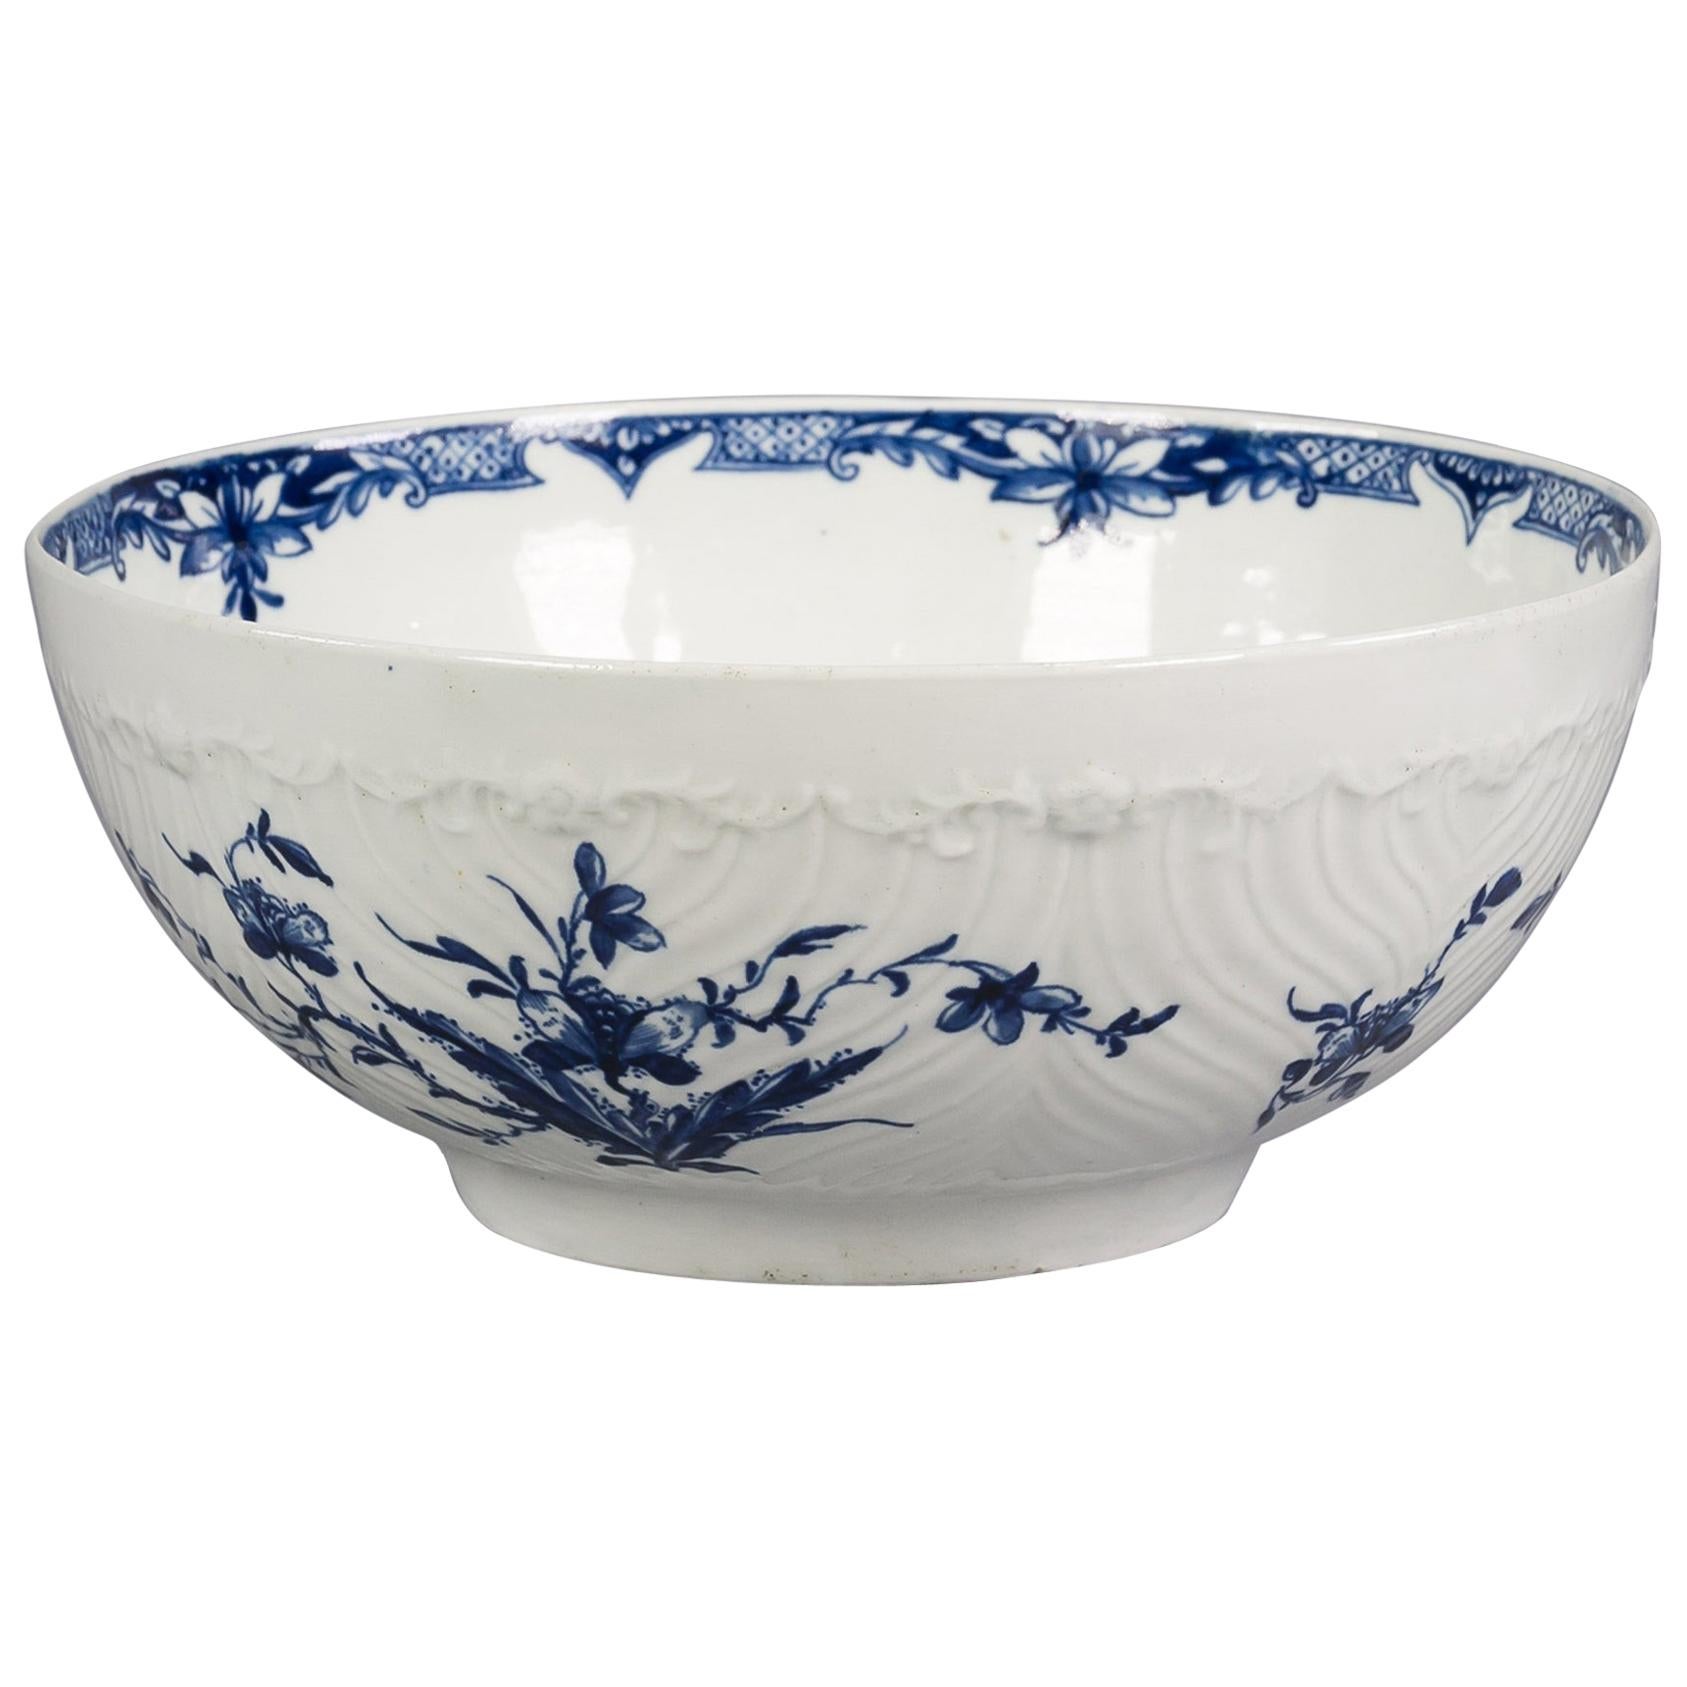 English Porcelain Blue and White Molded Bowl, Worcester, circa 1775